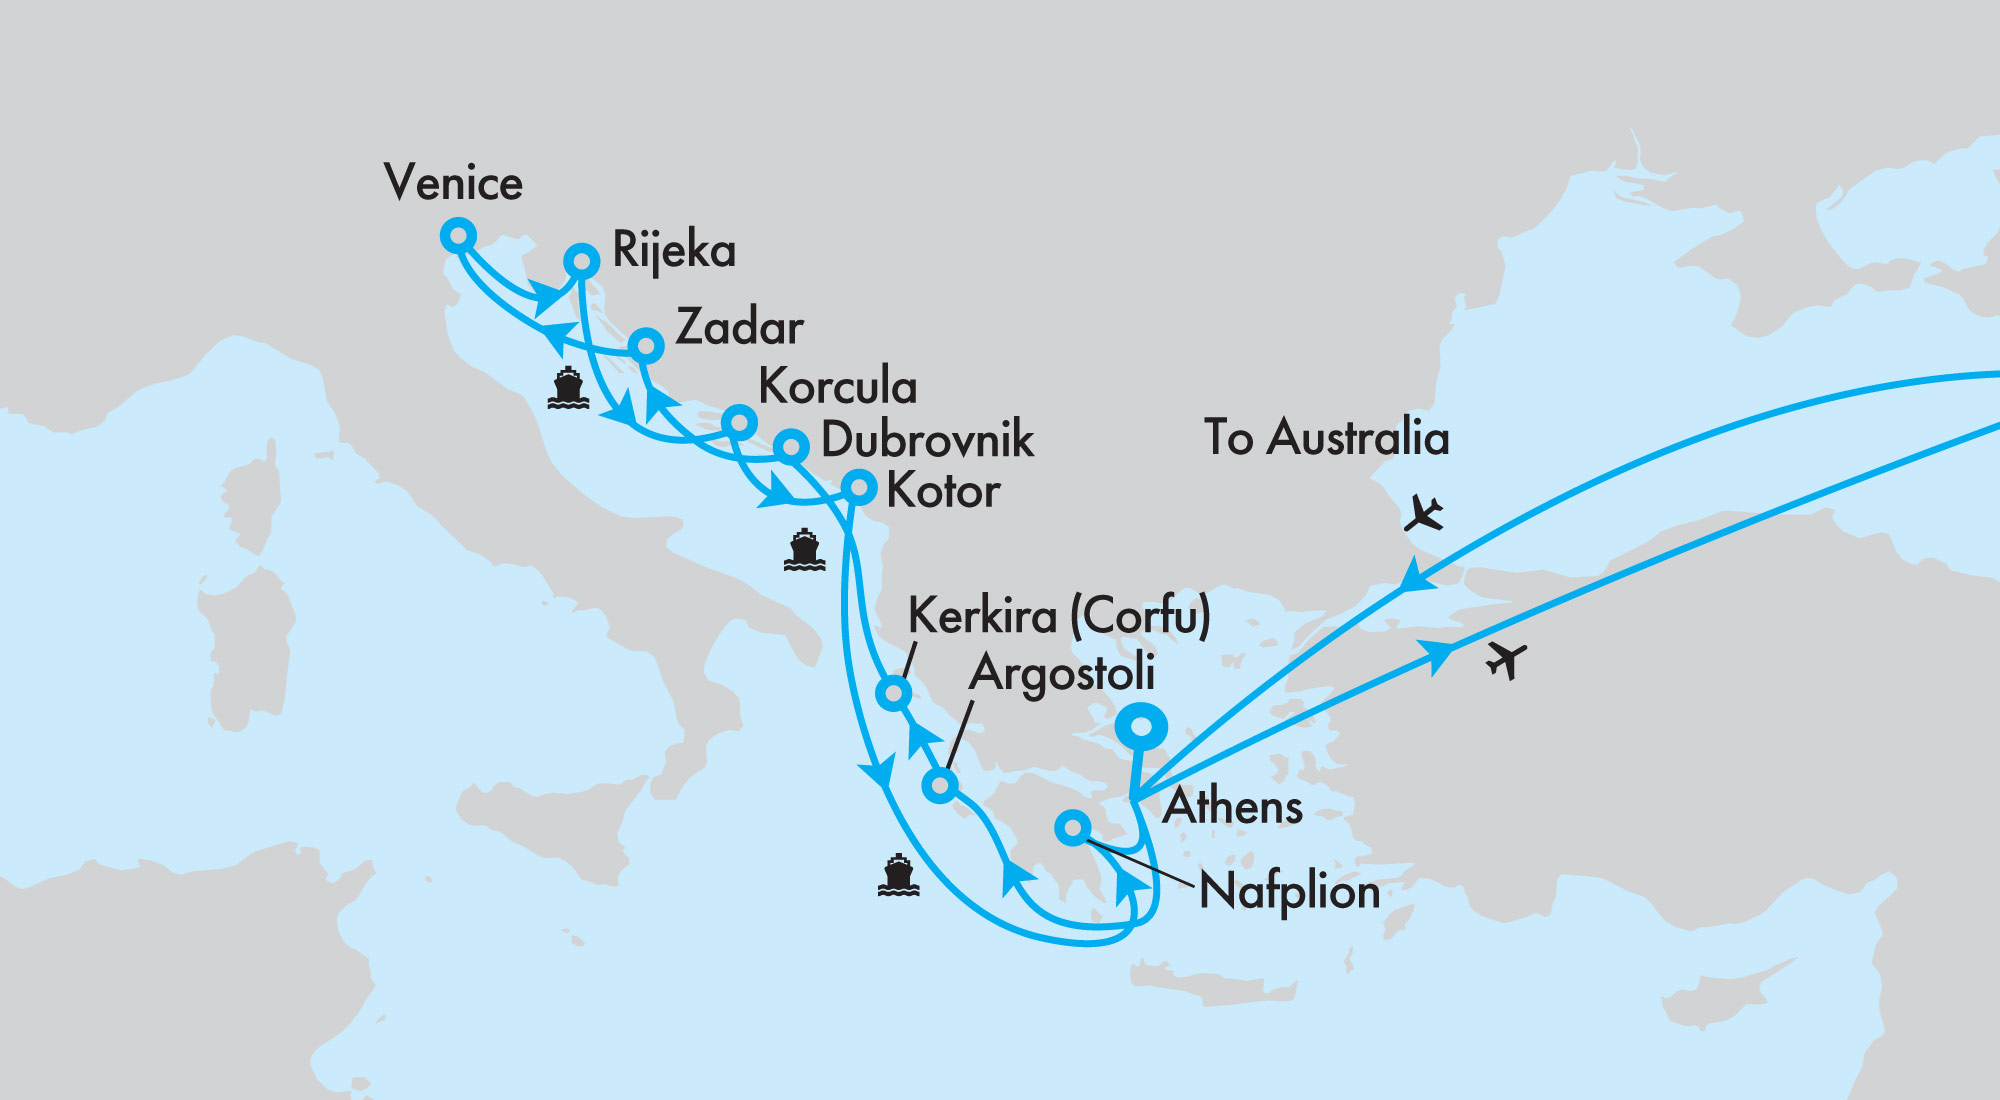 Fly, Stay, Cruise, Venetian & Dalmatian Delights with Holland America